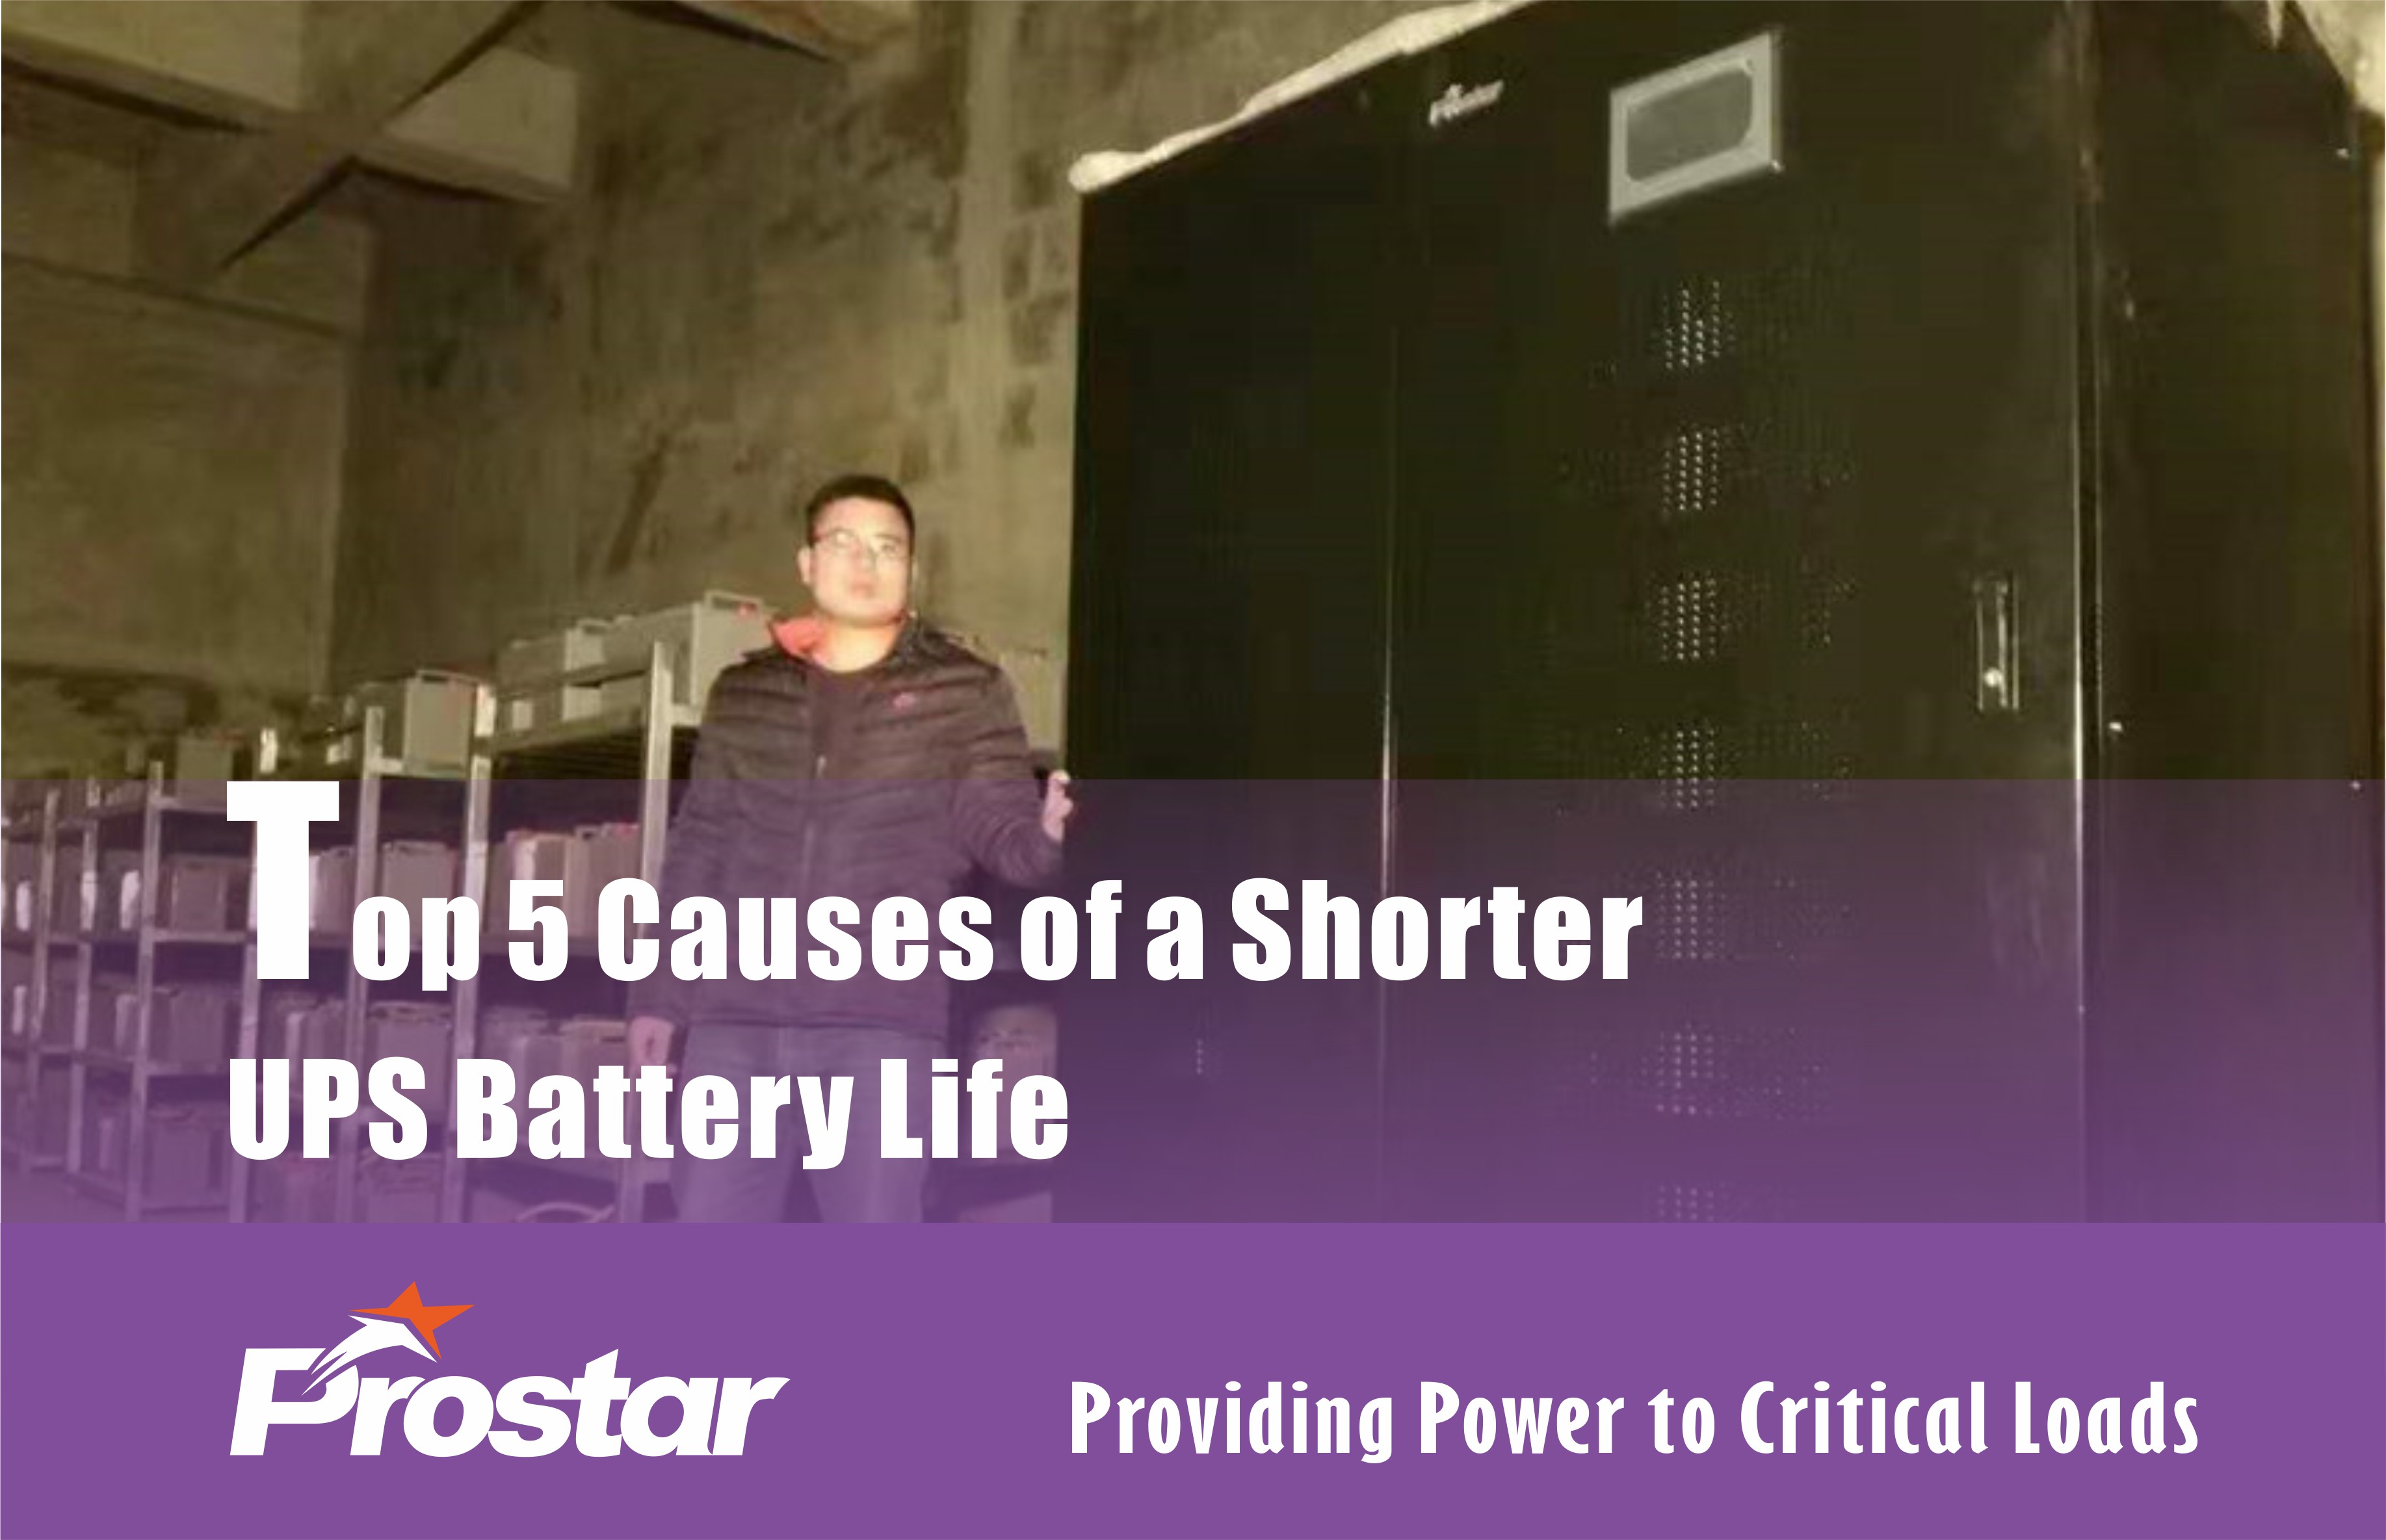 Top 5 Causes of a Shorter UPS Battery Life